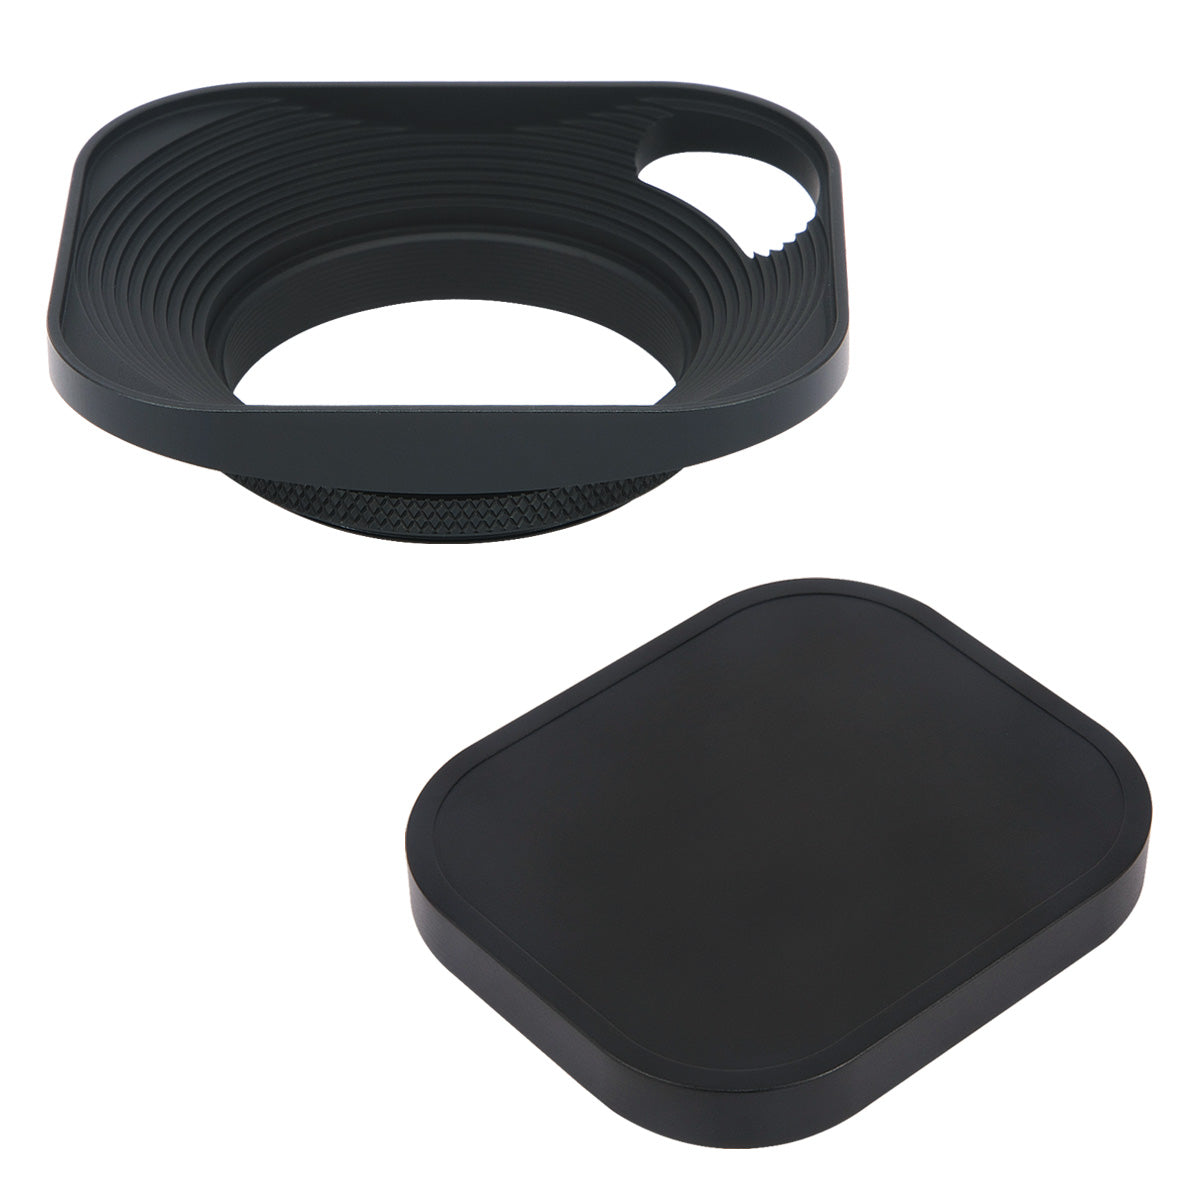 Haoge LH-B43P 43mm Square Metal Screw-in Lens Hood Hollow Out Designed with Cap for Leica Rangefinder Camera with 43mm E43 Filter Thread Lens Black